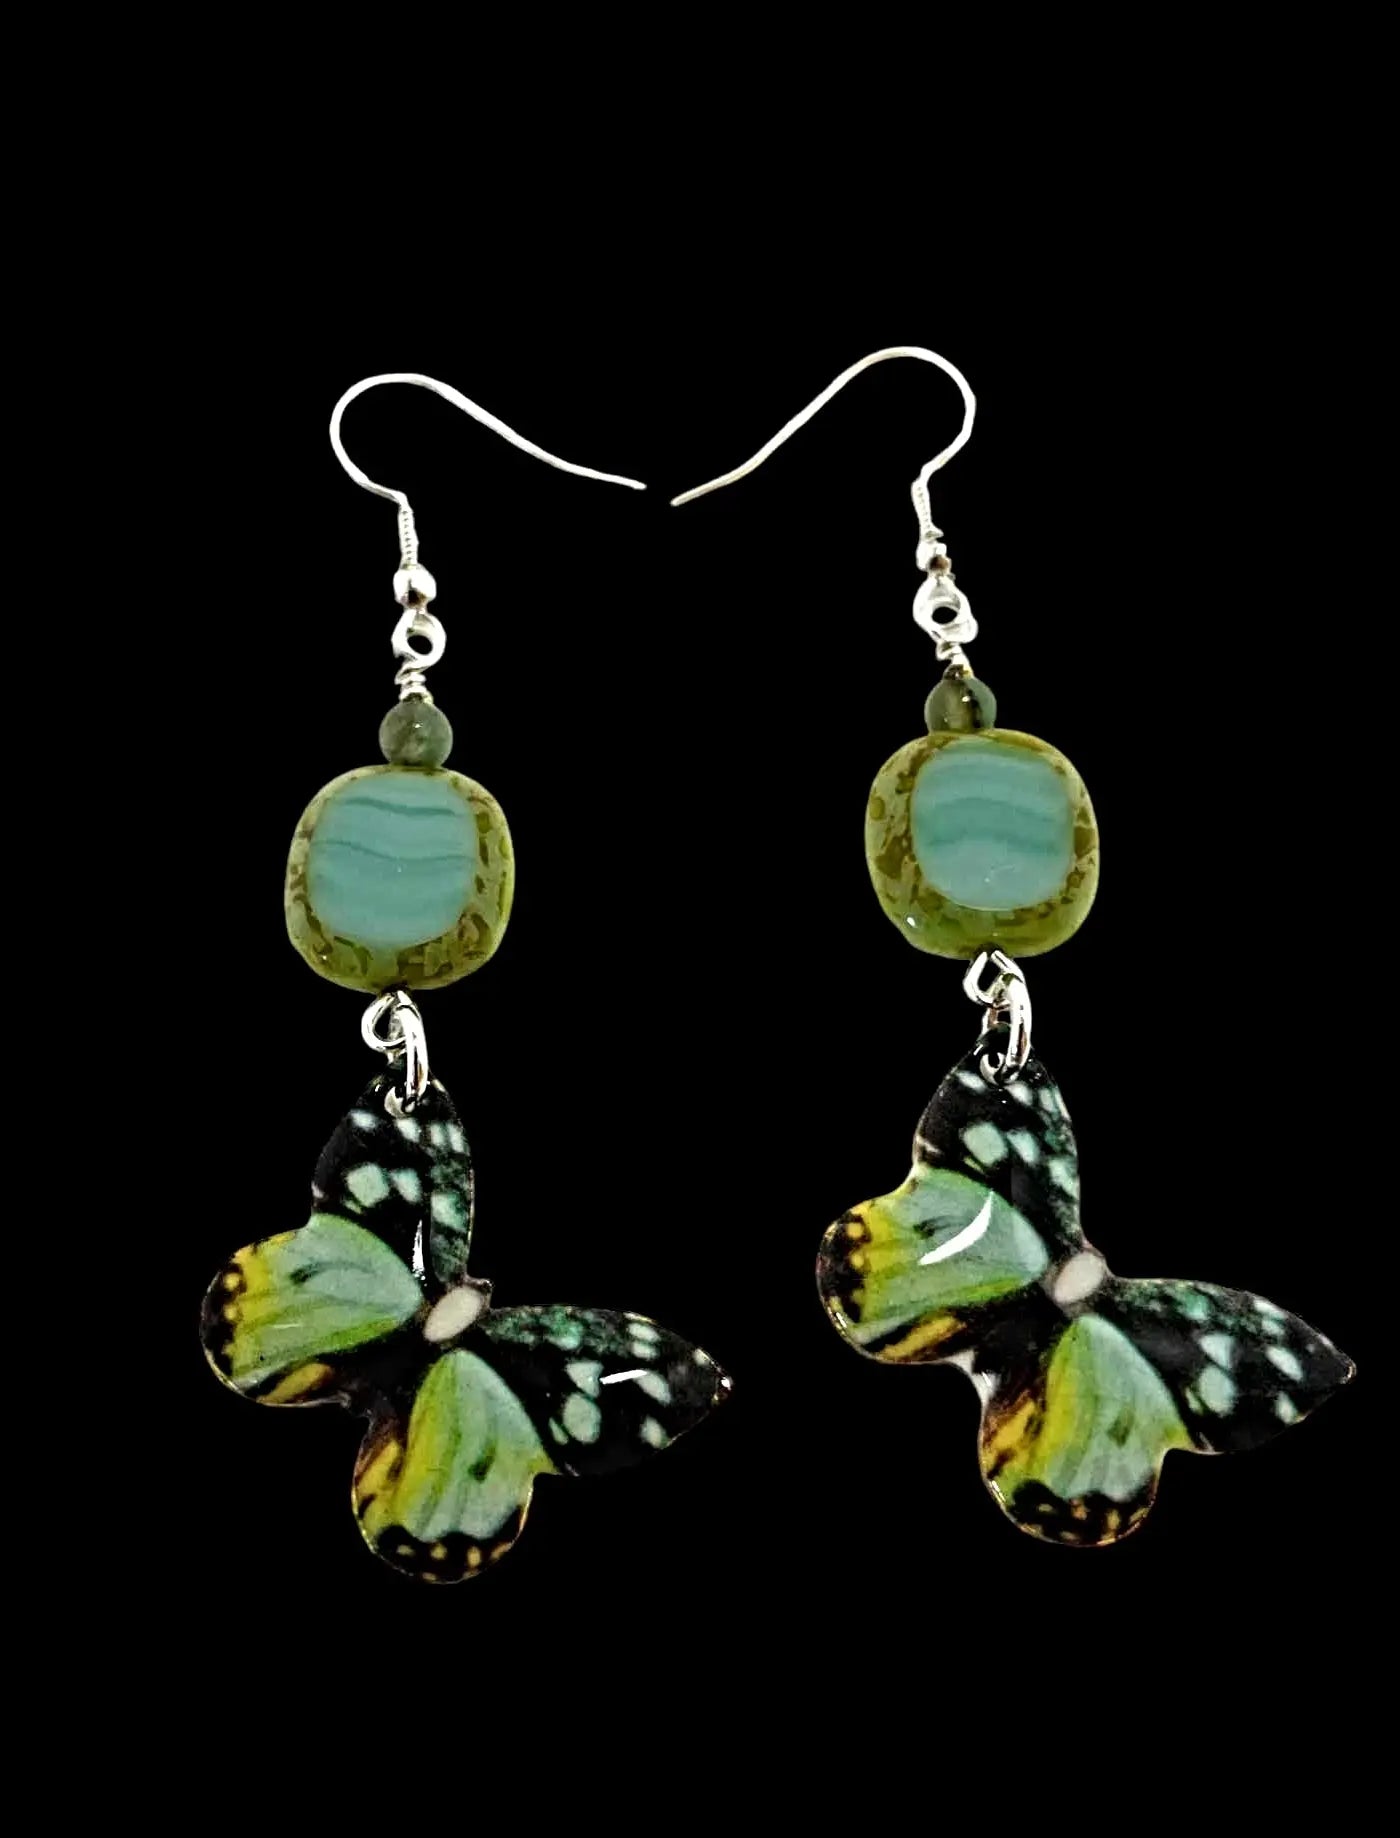 Handcrafted butterfly earrings by Linda - Image #3